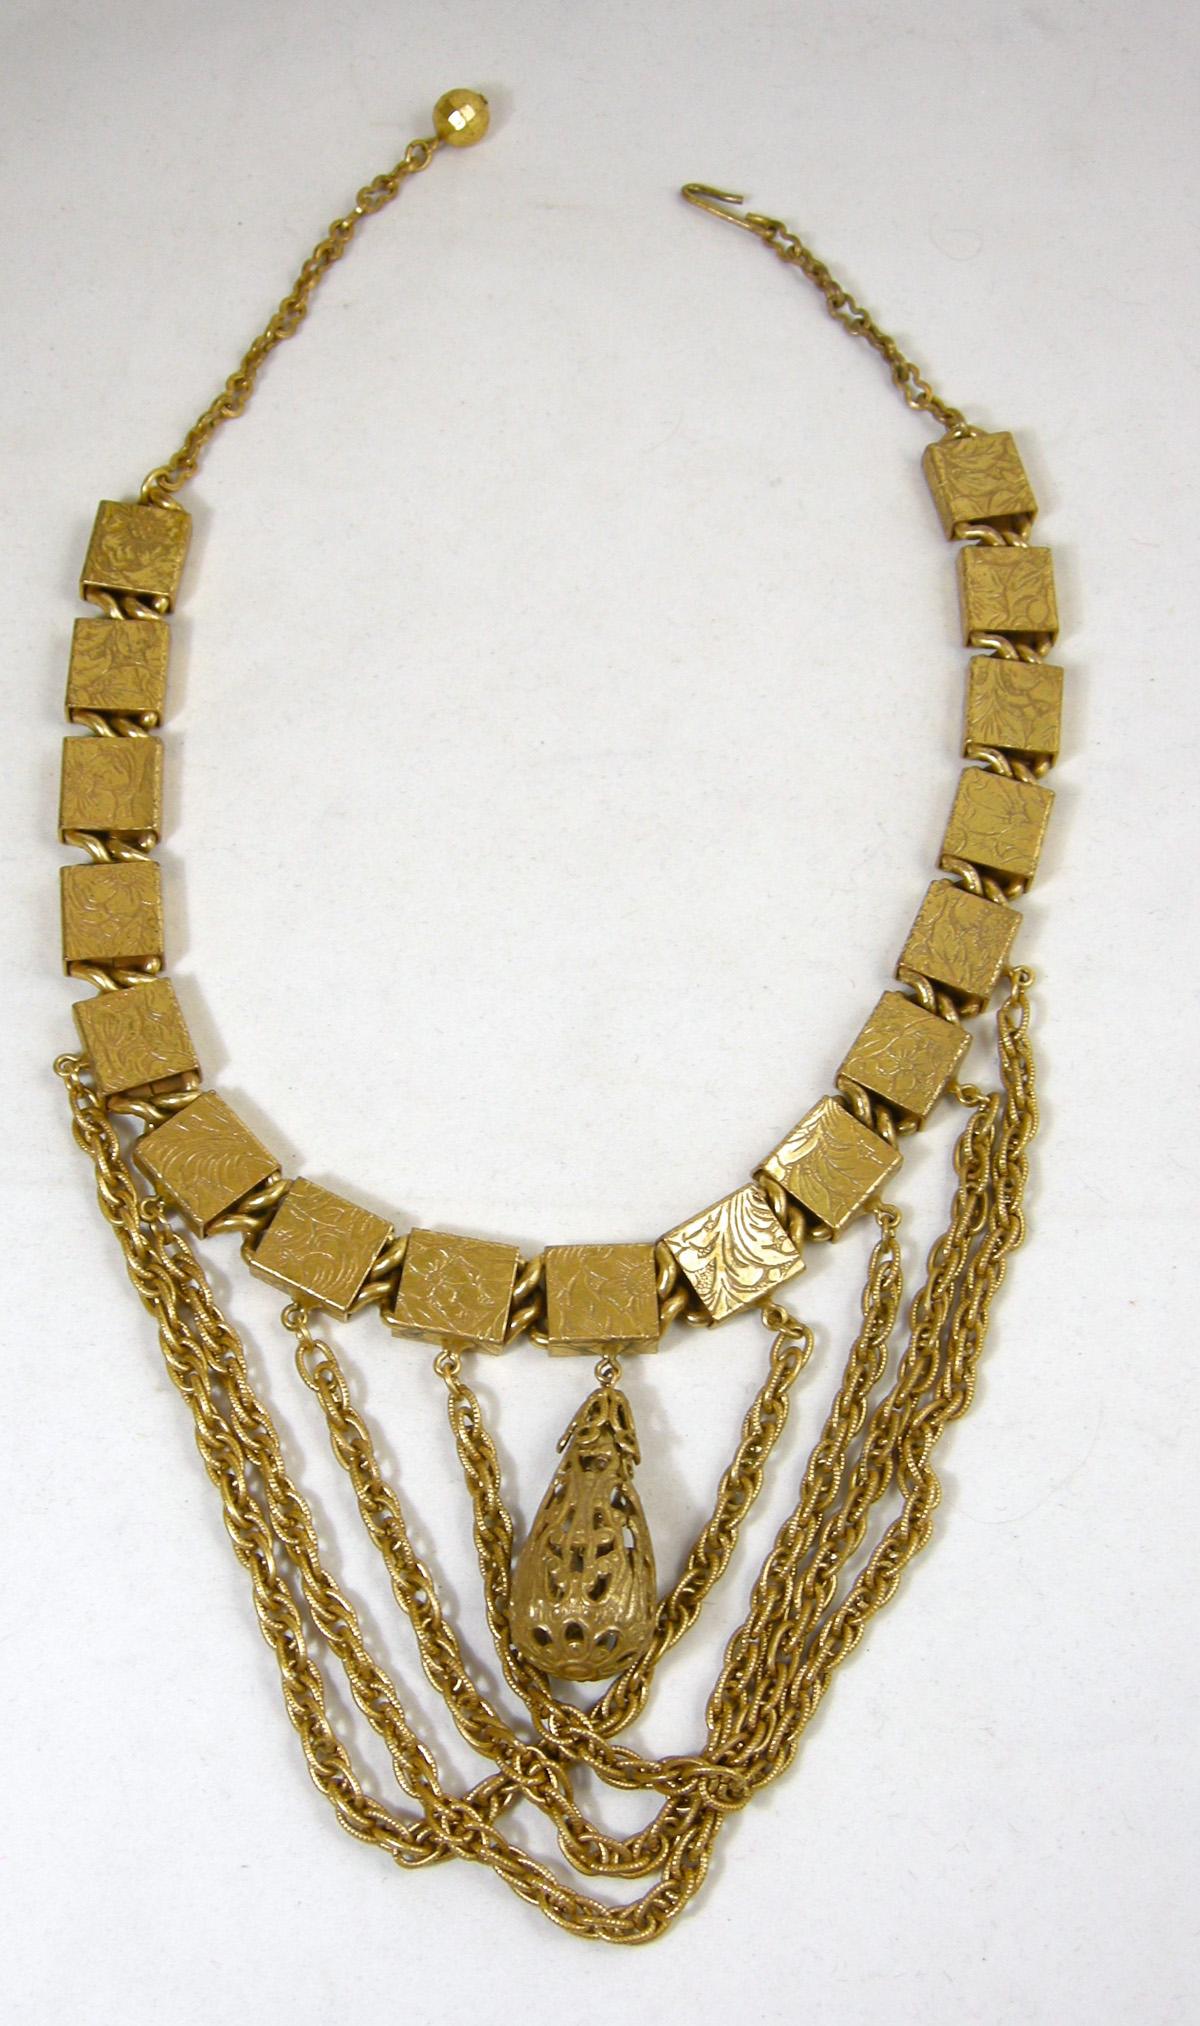 This unique retro bib necklace has ornate engraved boxed links that hold four swirling chains with an ornate gold tone filigree drop.  The necklace is 17-1/2” long with a 6” wide with q chain center.  The chains drop approx 4” and the filigree drop